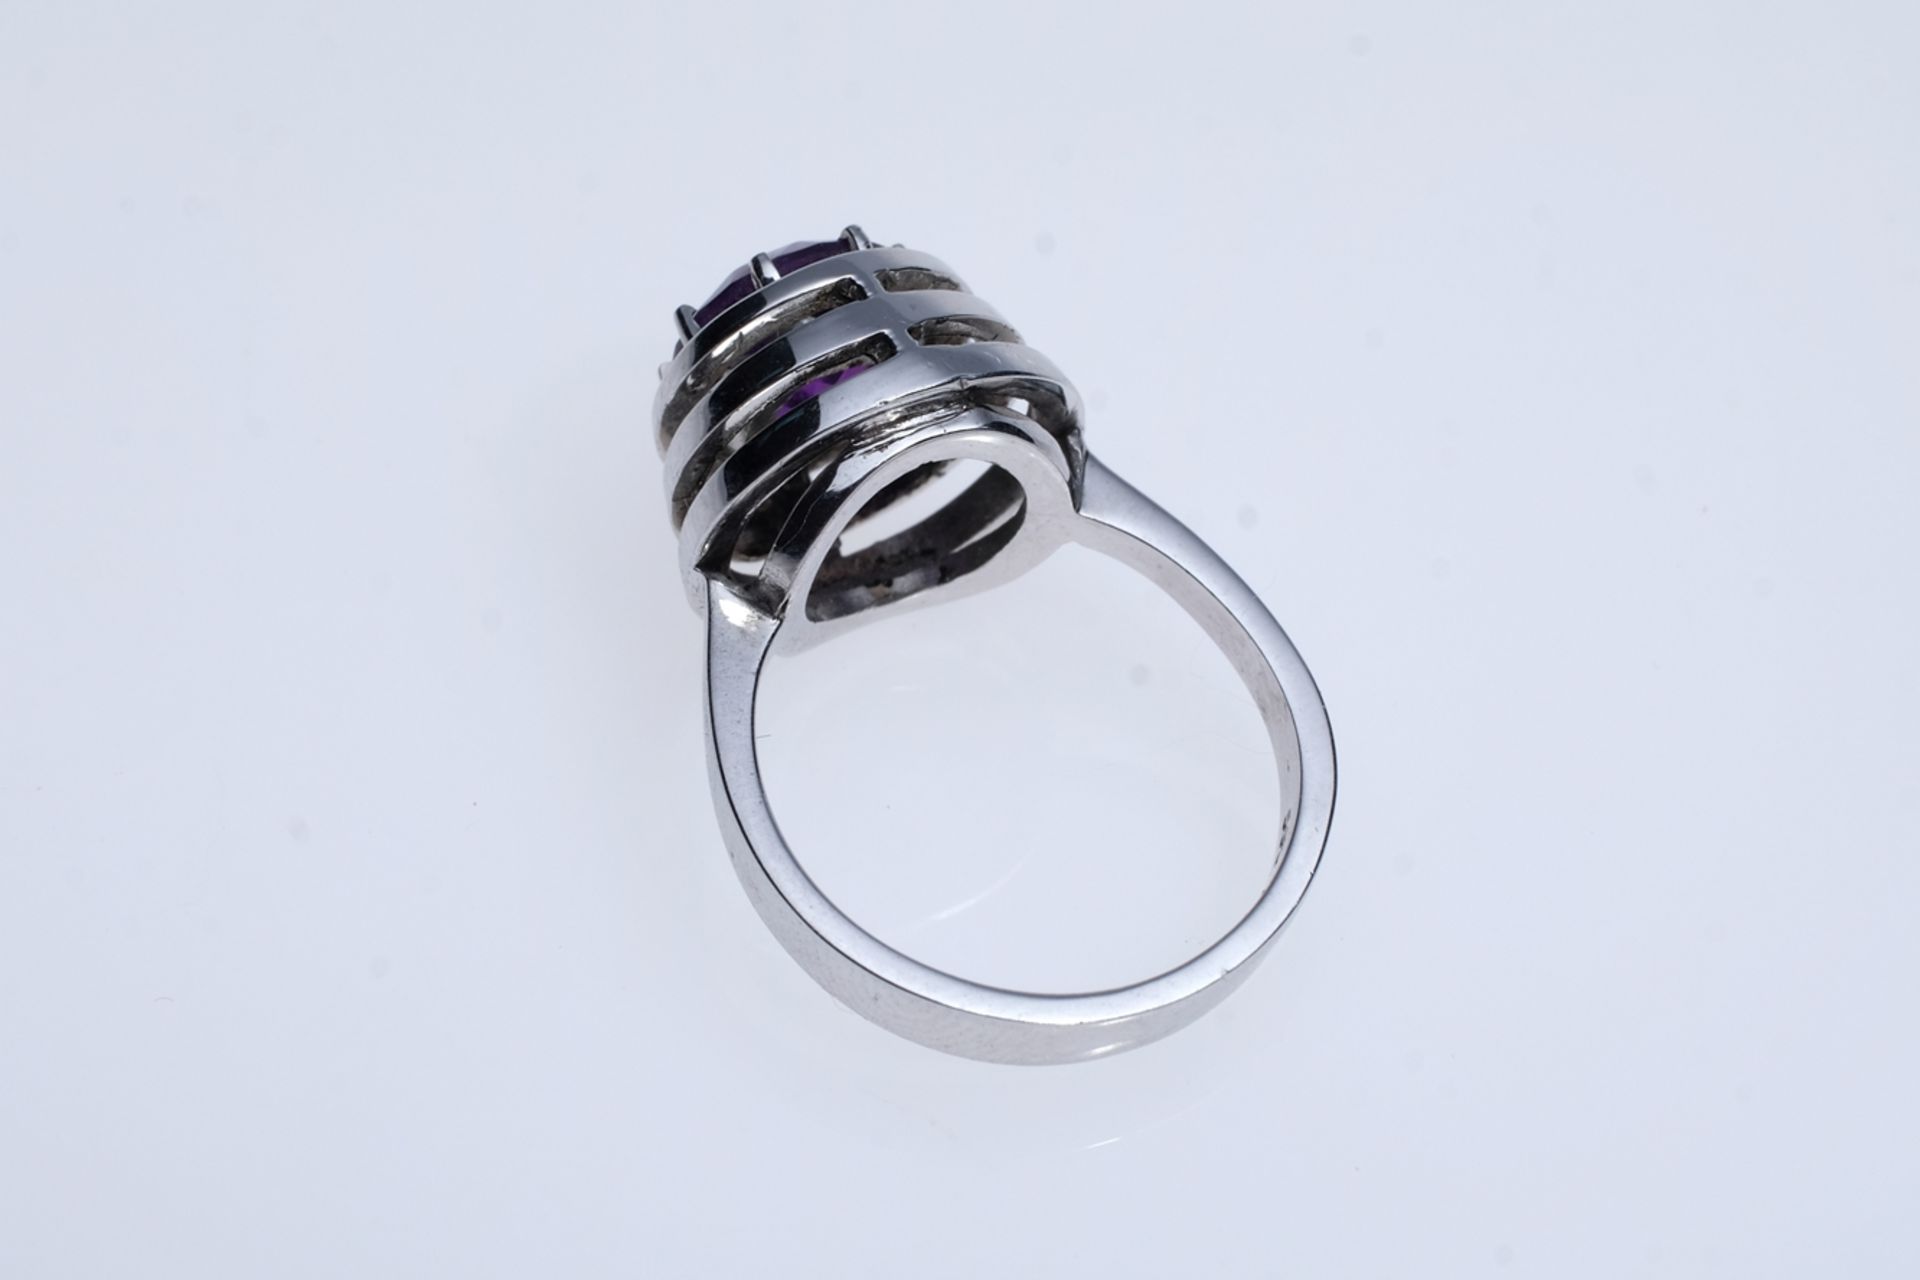 Amethyst ring, amethyst (D 8mm) set in prongs, white gold 585, hallmarked, goldsmith's mark, 5.51g, - Image 2 of 2